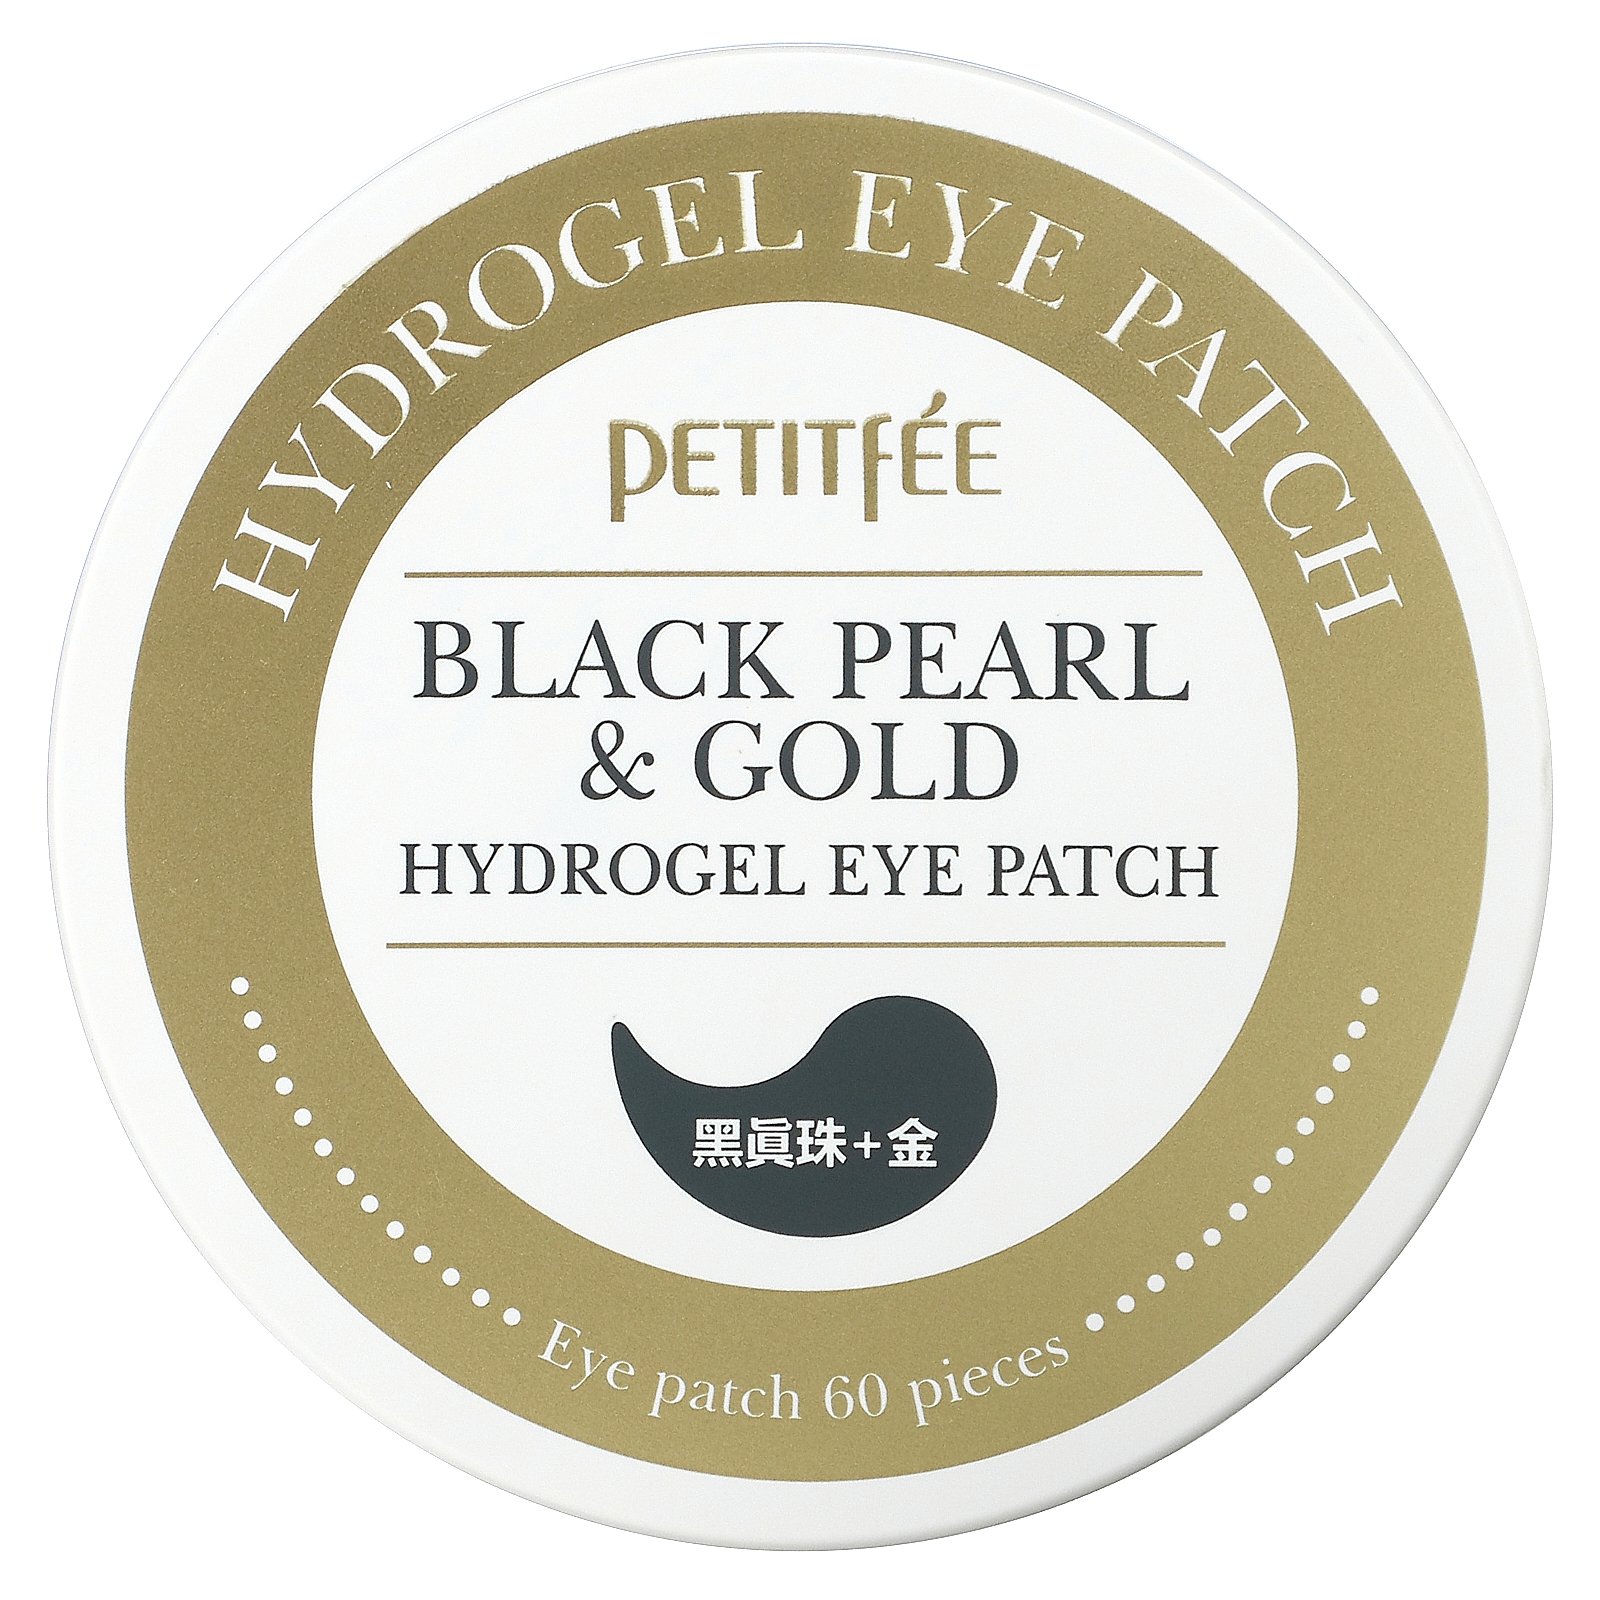 Petitfee Black Pearl & Gold Hydrogel Eye Patch, 60 Patches - image 1 of 4